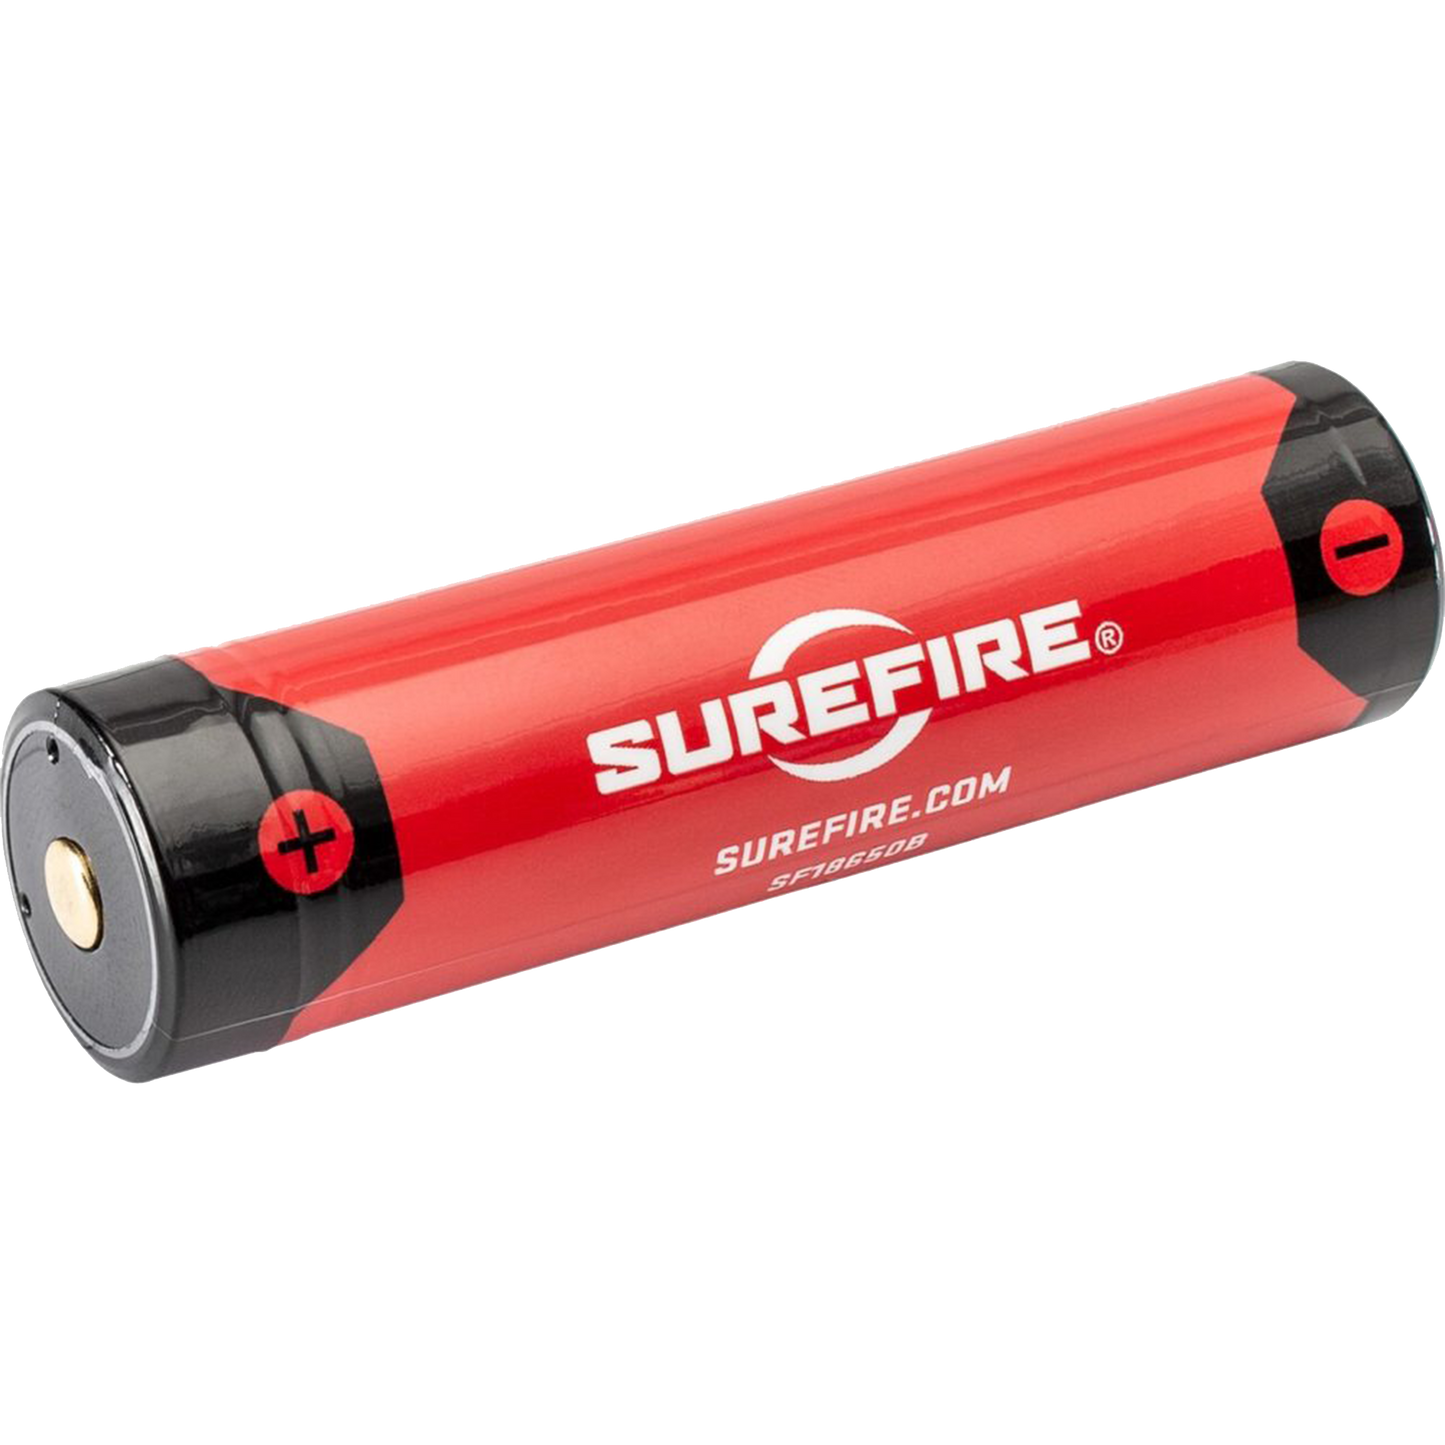 Surefire, CR18650 3.6v LI-Ion Battery, USB Charge Cable Included